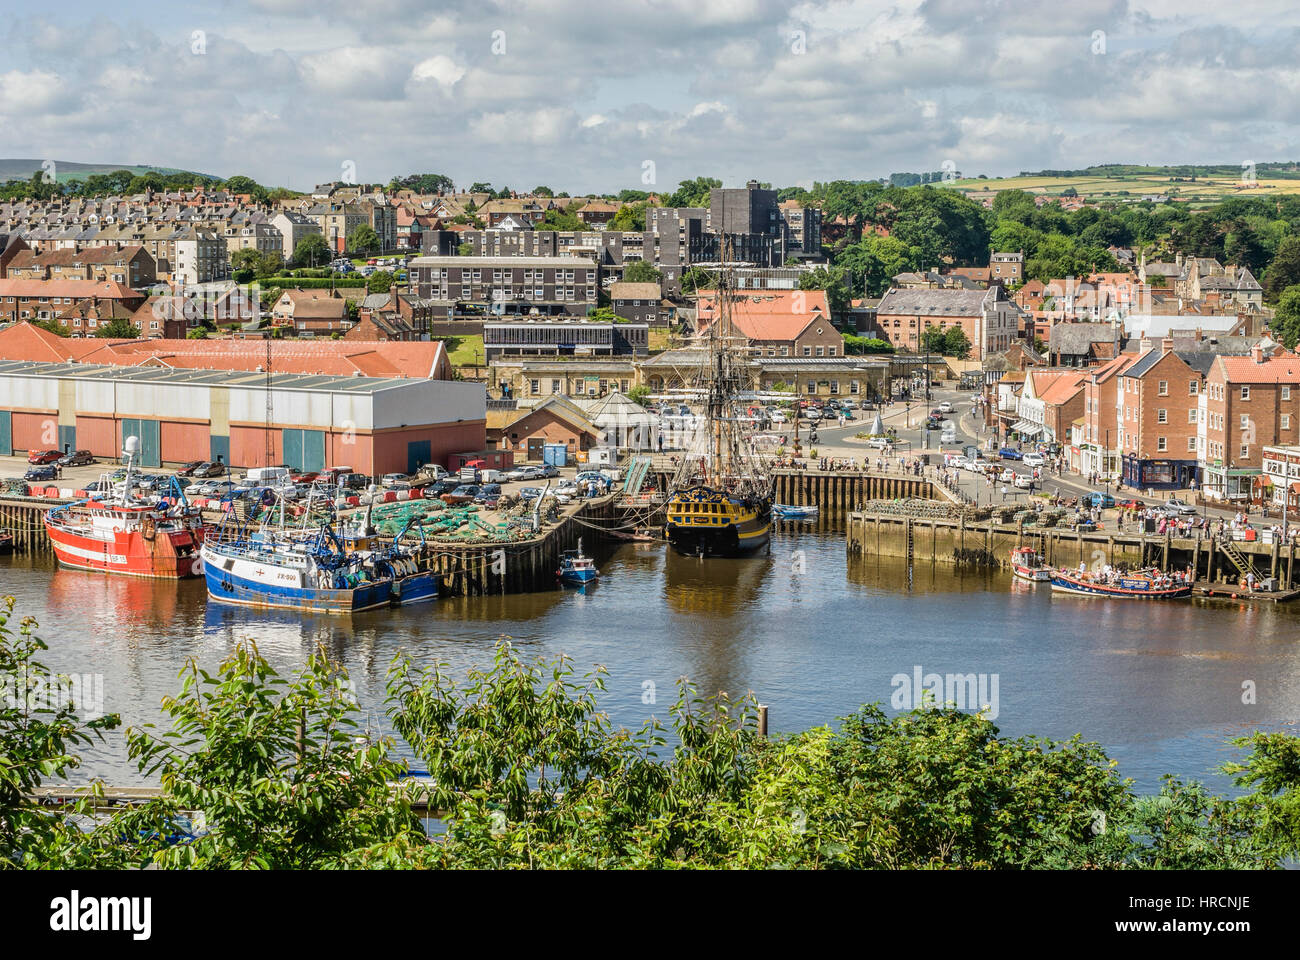 Elevated view over old town of Whitby, England, UK Stock Photo